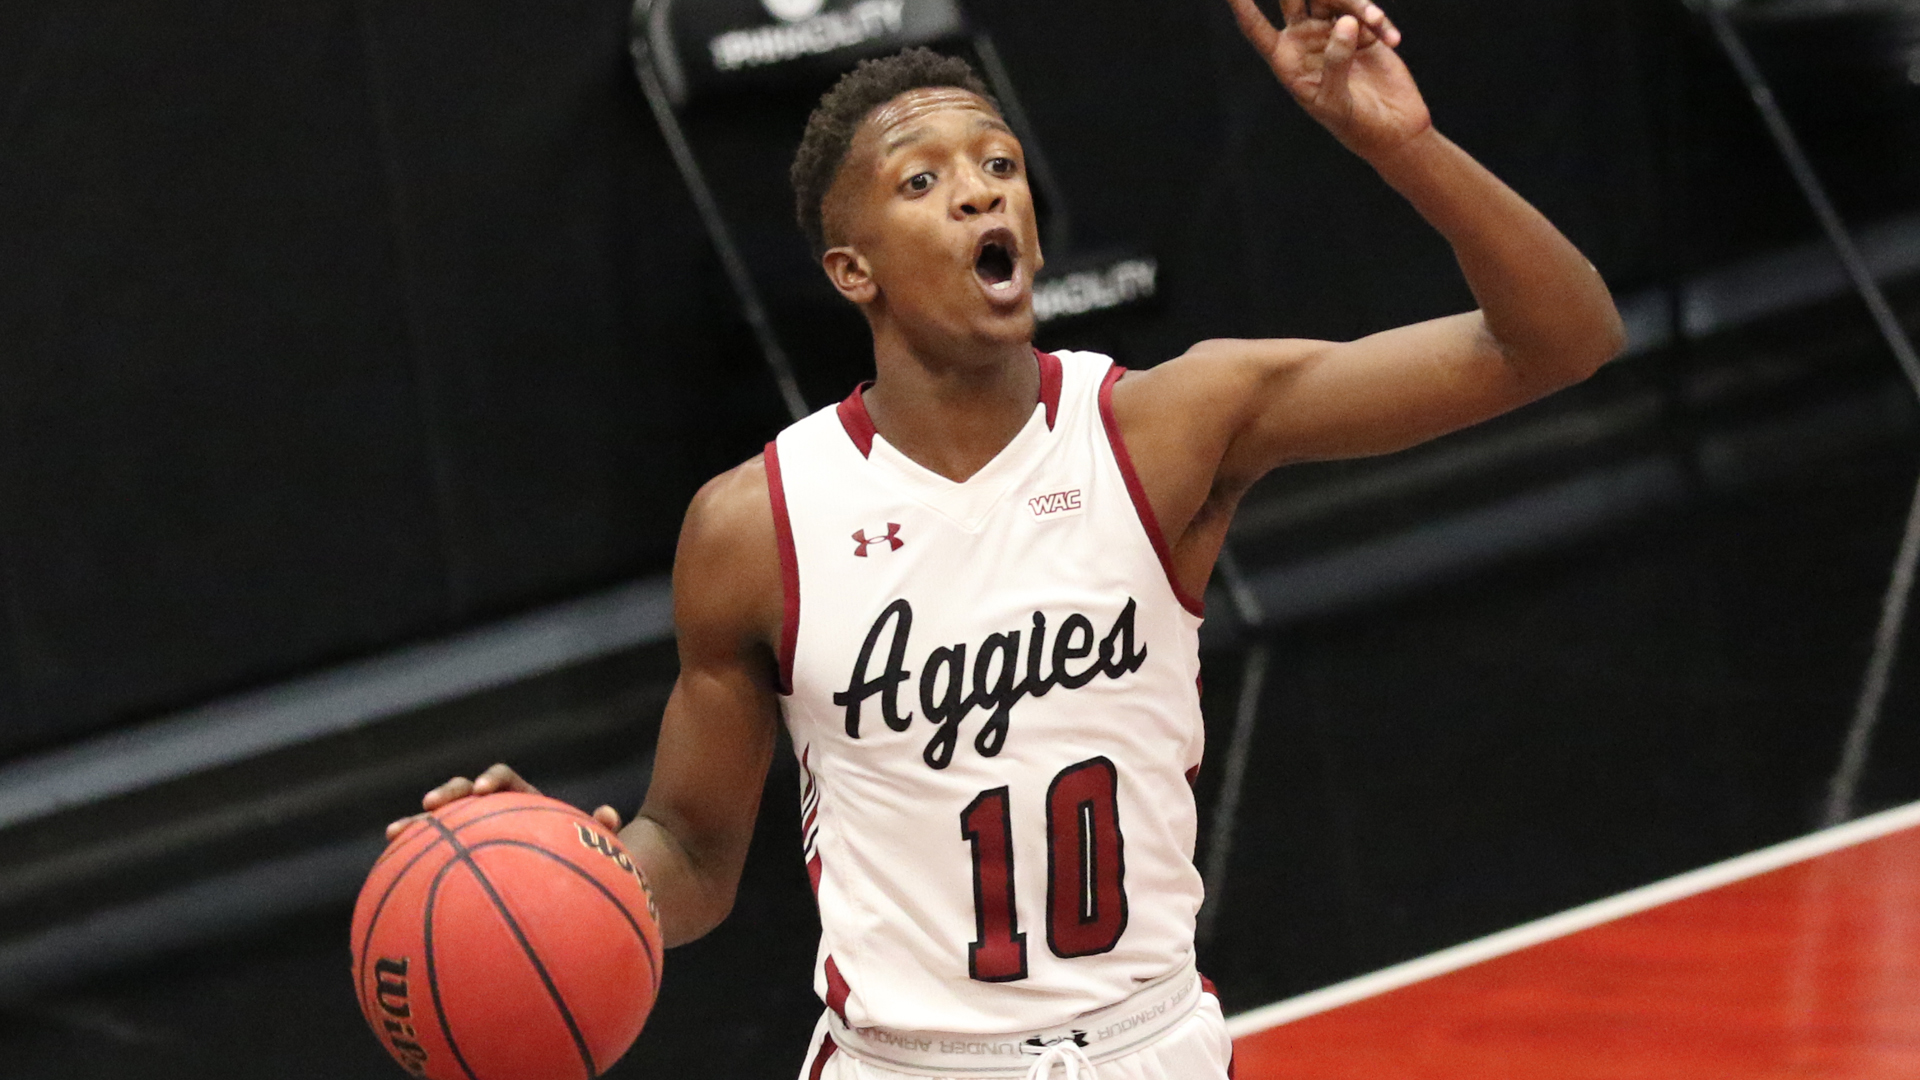 Look for Jabari Rice to be a big force for New Mexico State basketball this season.